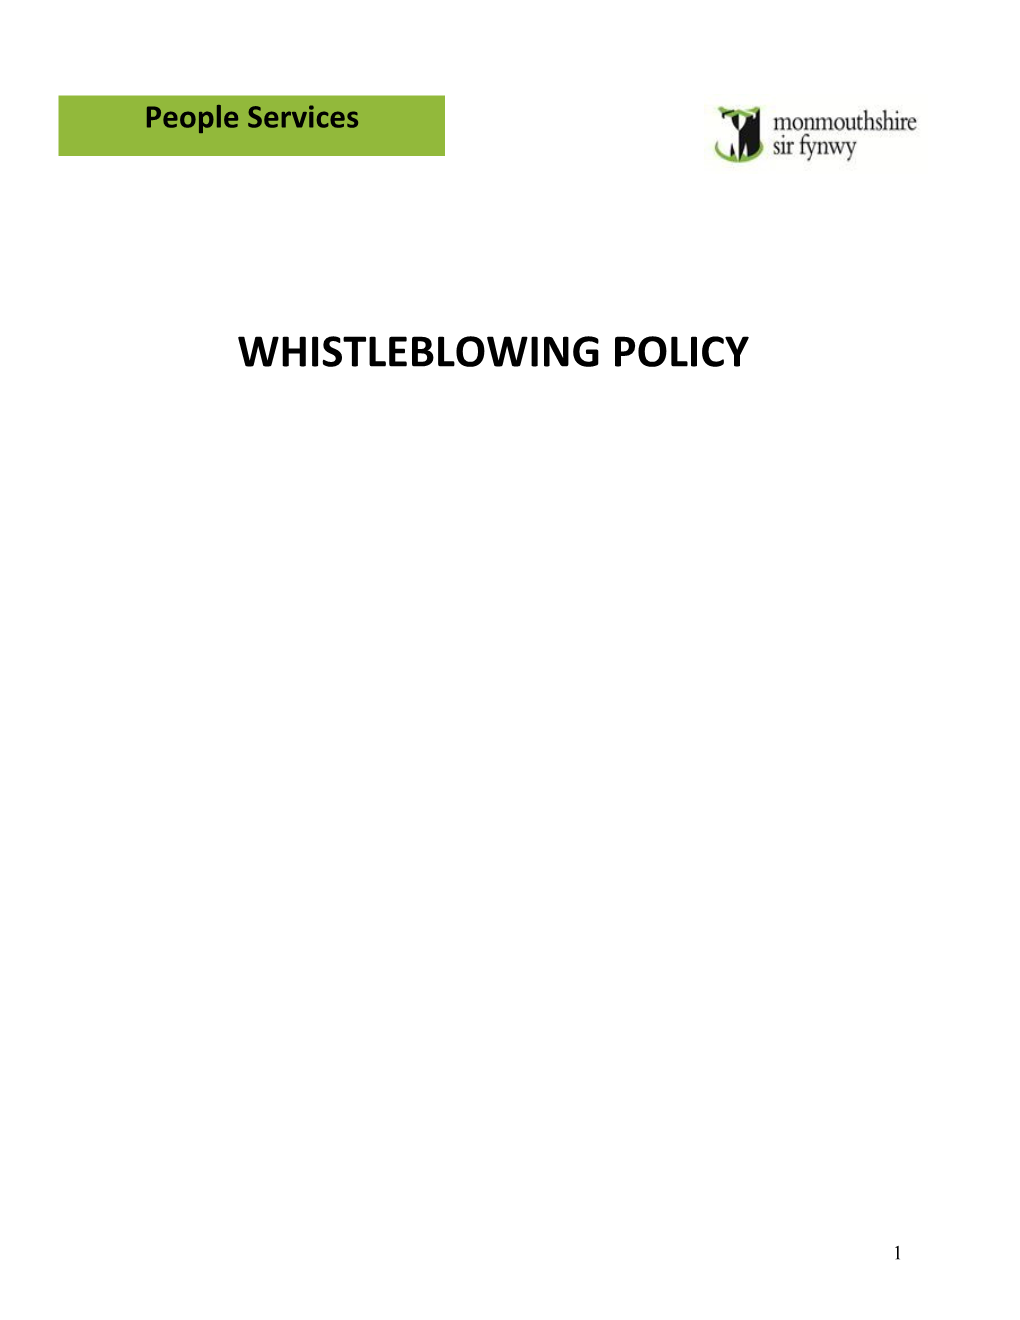 Whistleblowing Policy s3